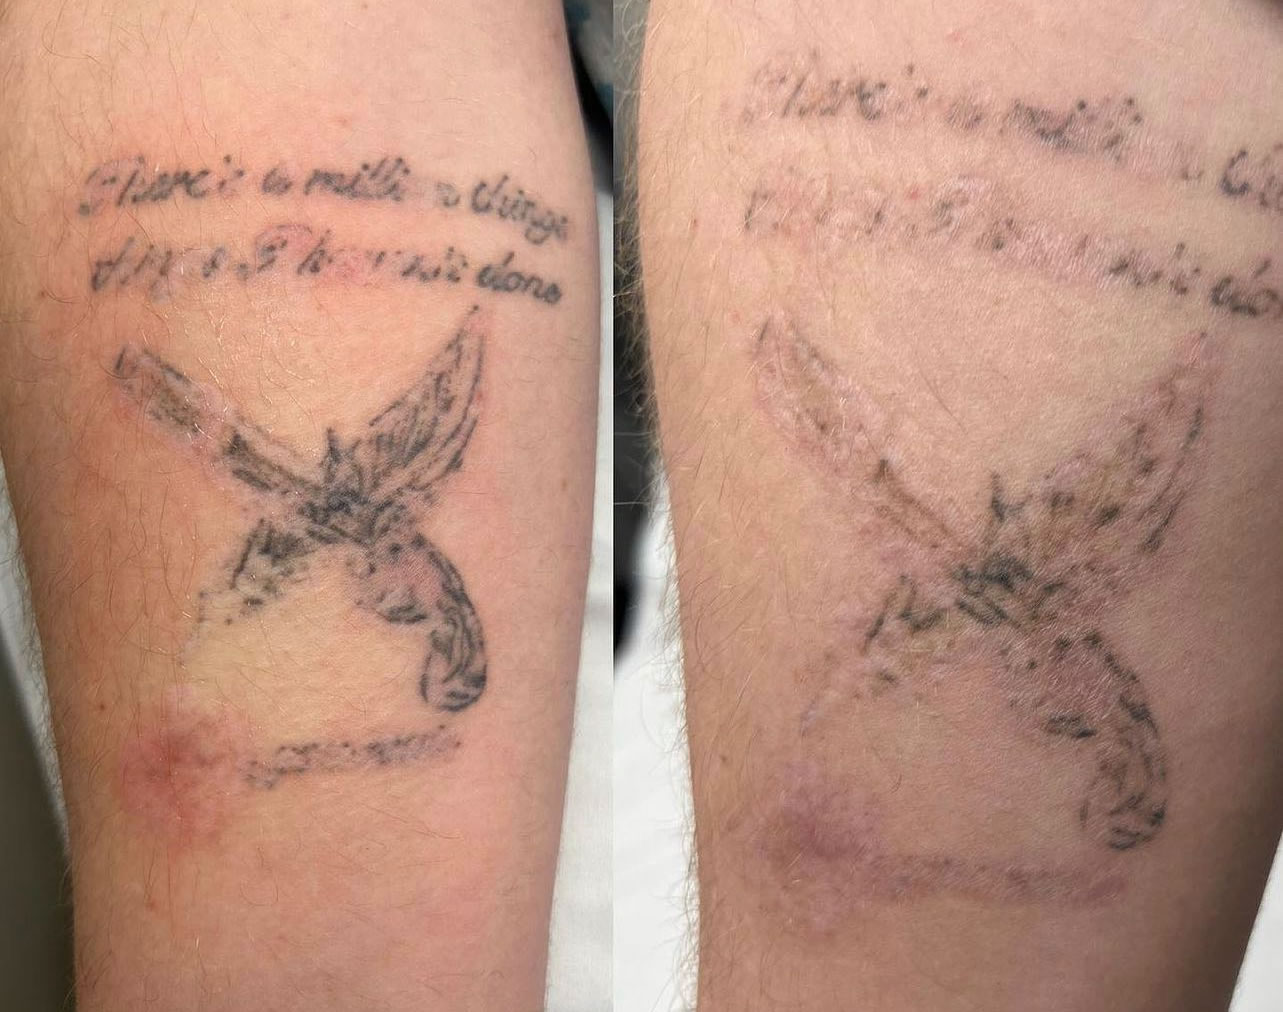 Before and after images of tattoo removal procedure showcasing the effectiveness of the treatment.